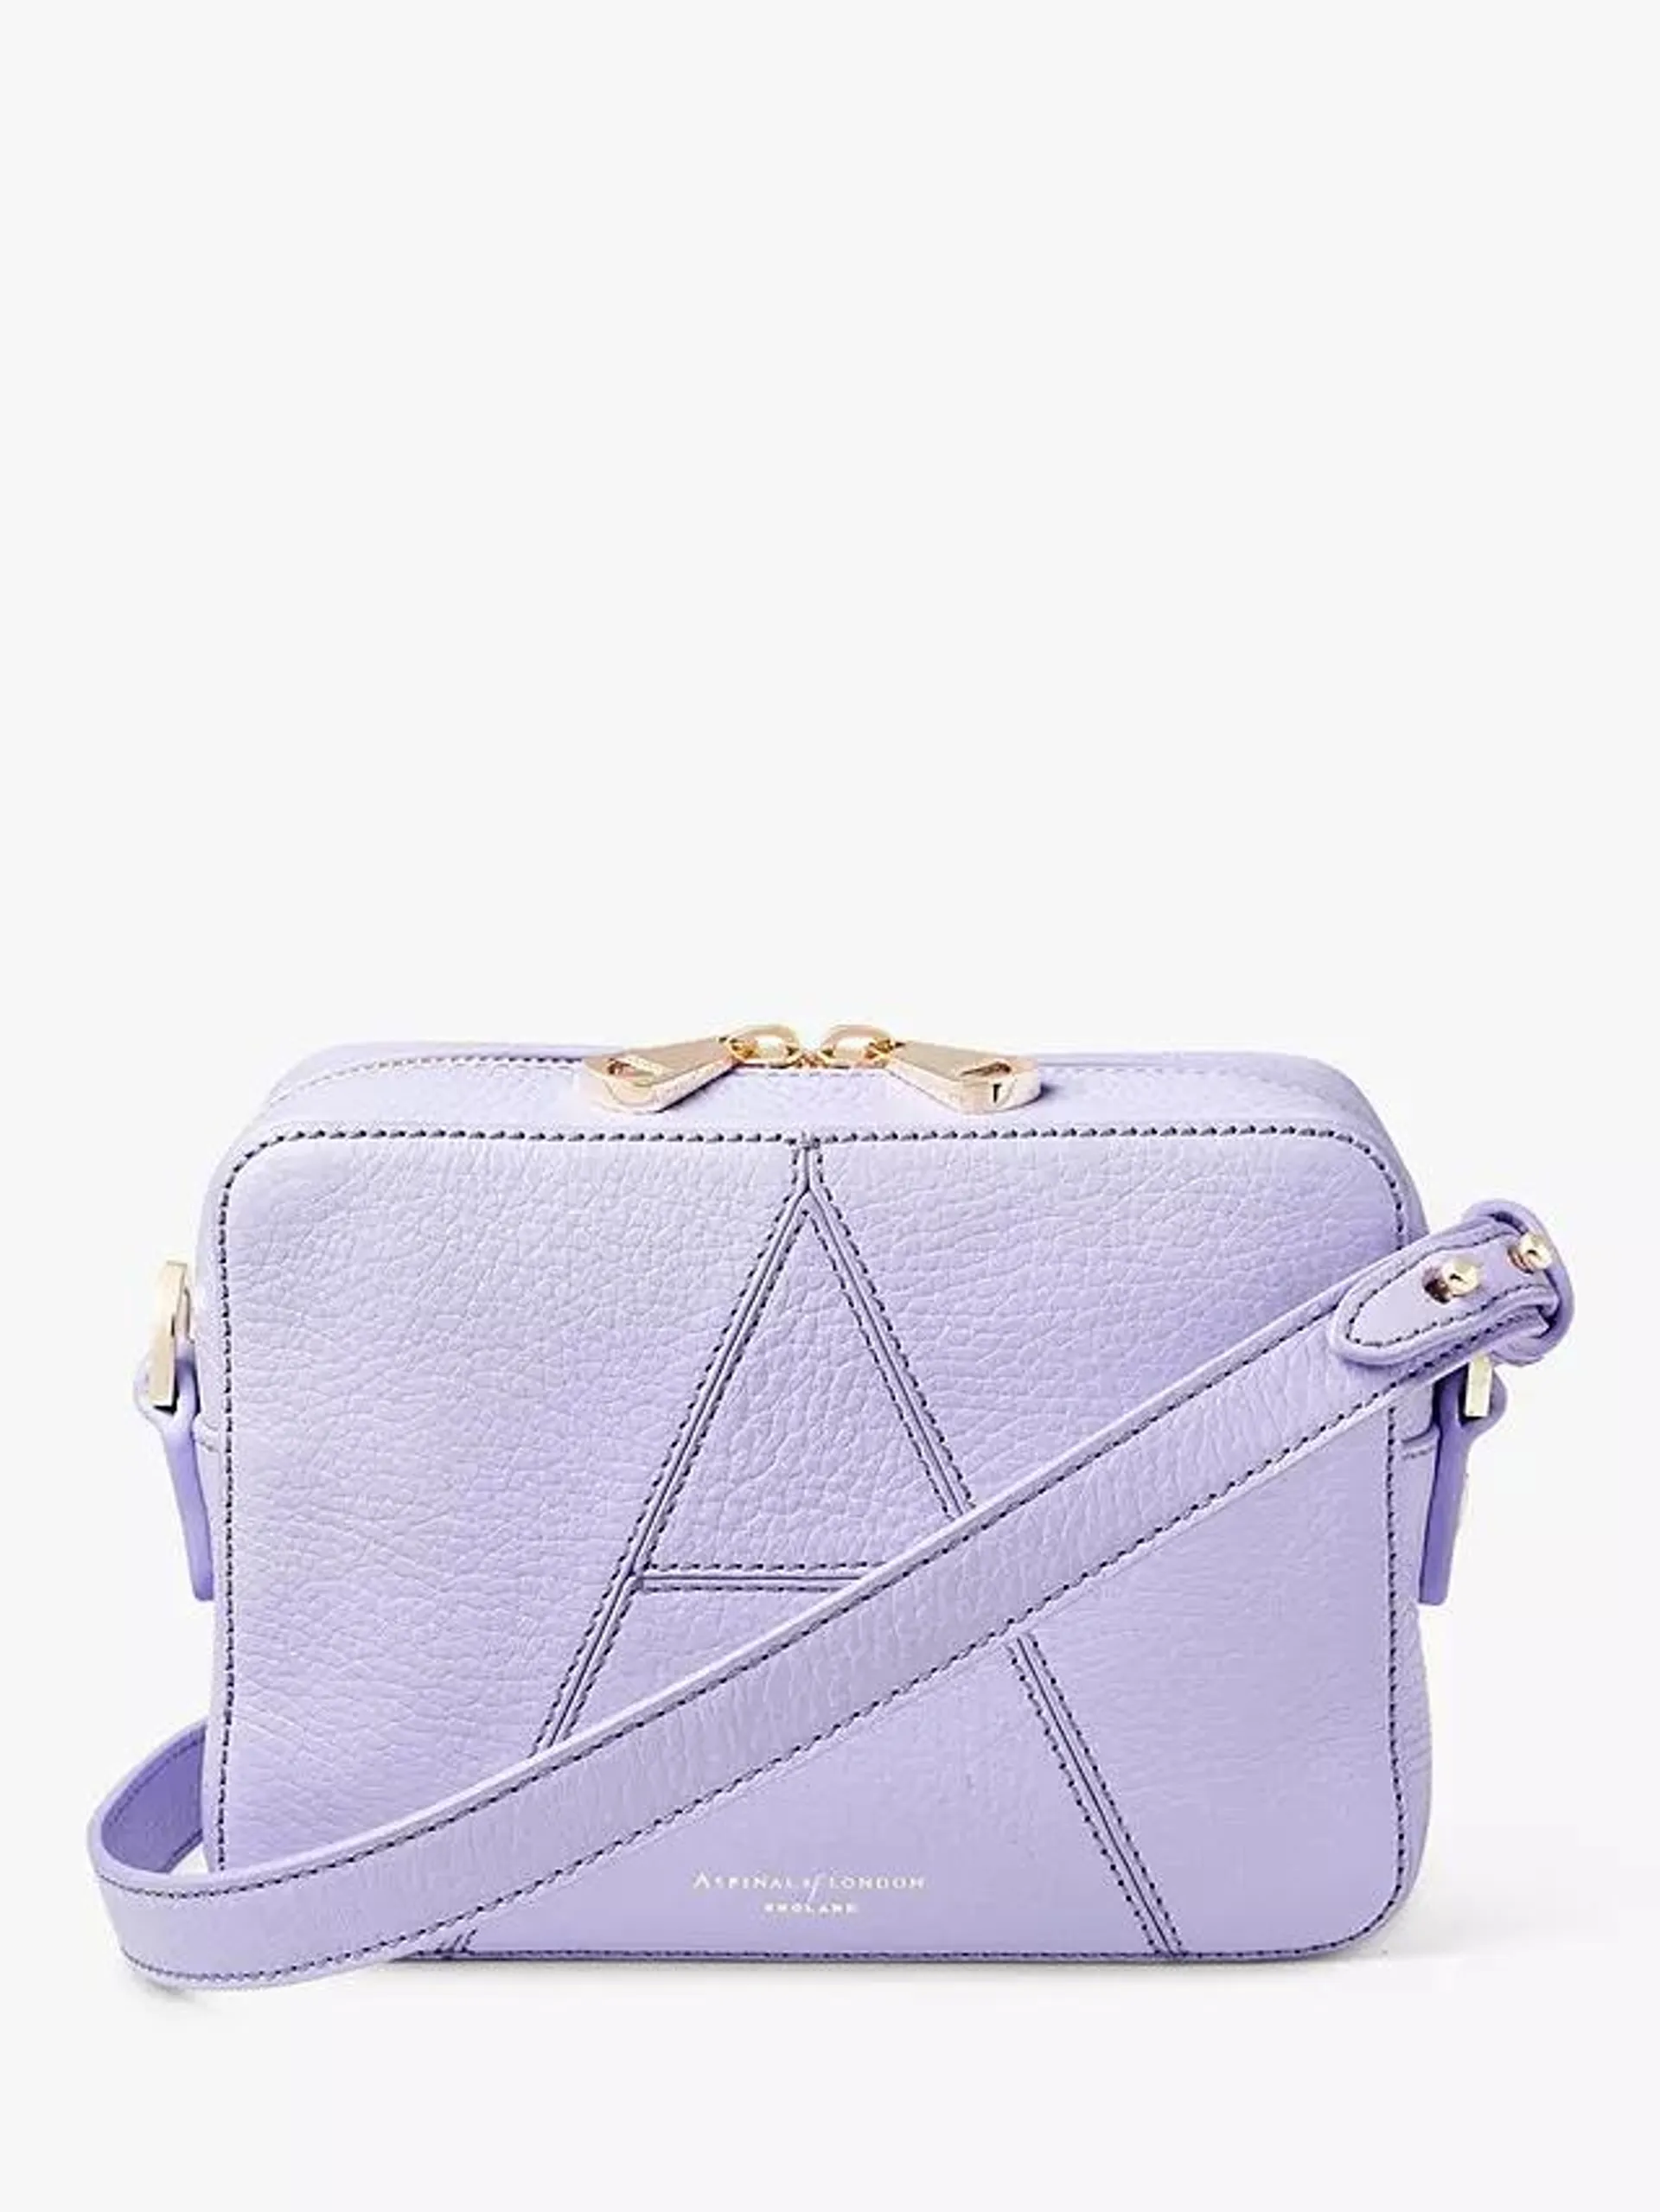 Aspinal of London Pebble Leather Camera A Bag, Lavender